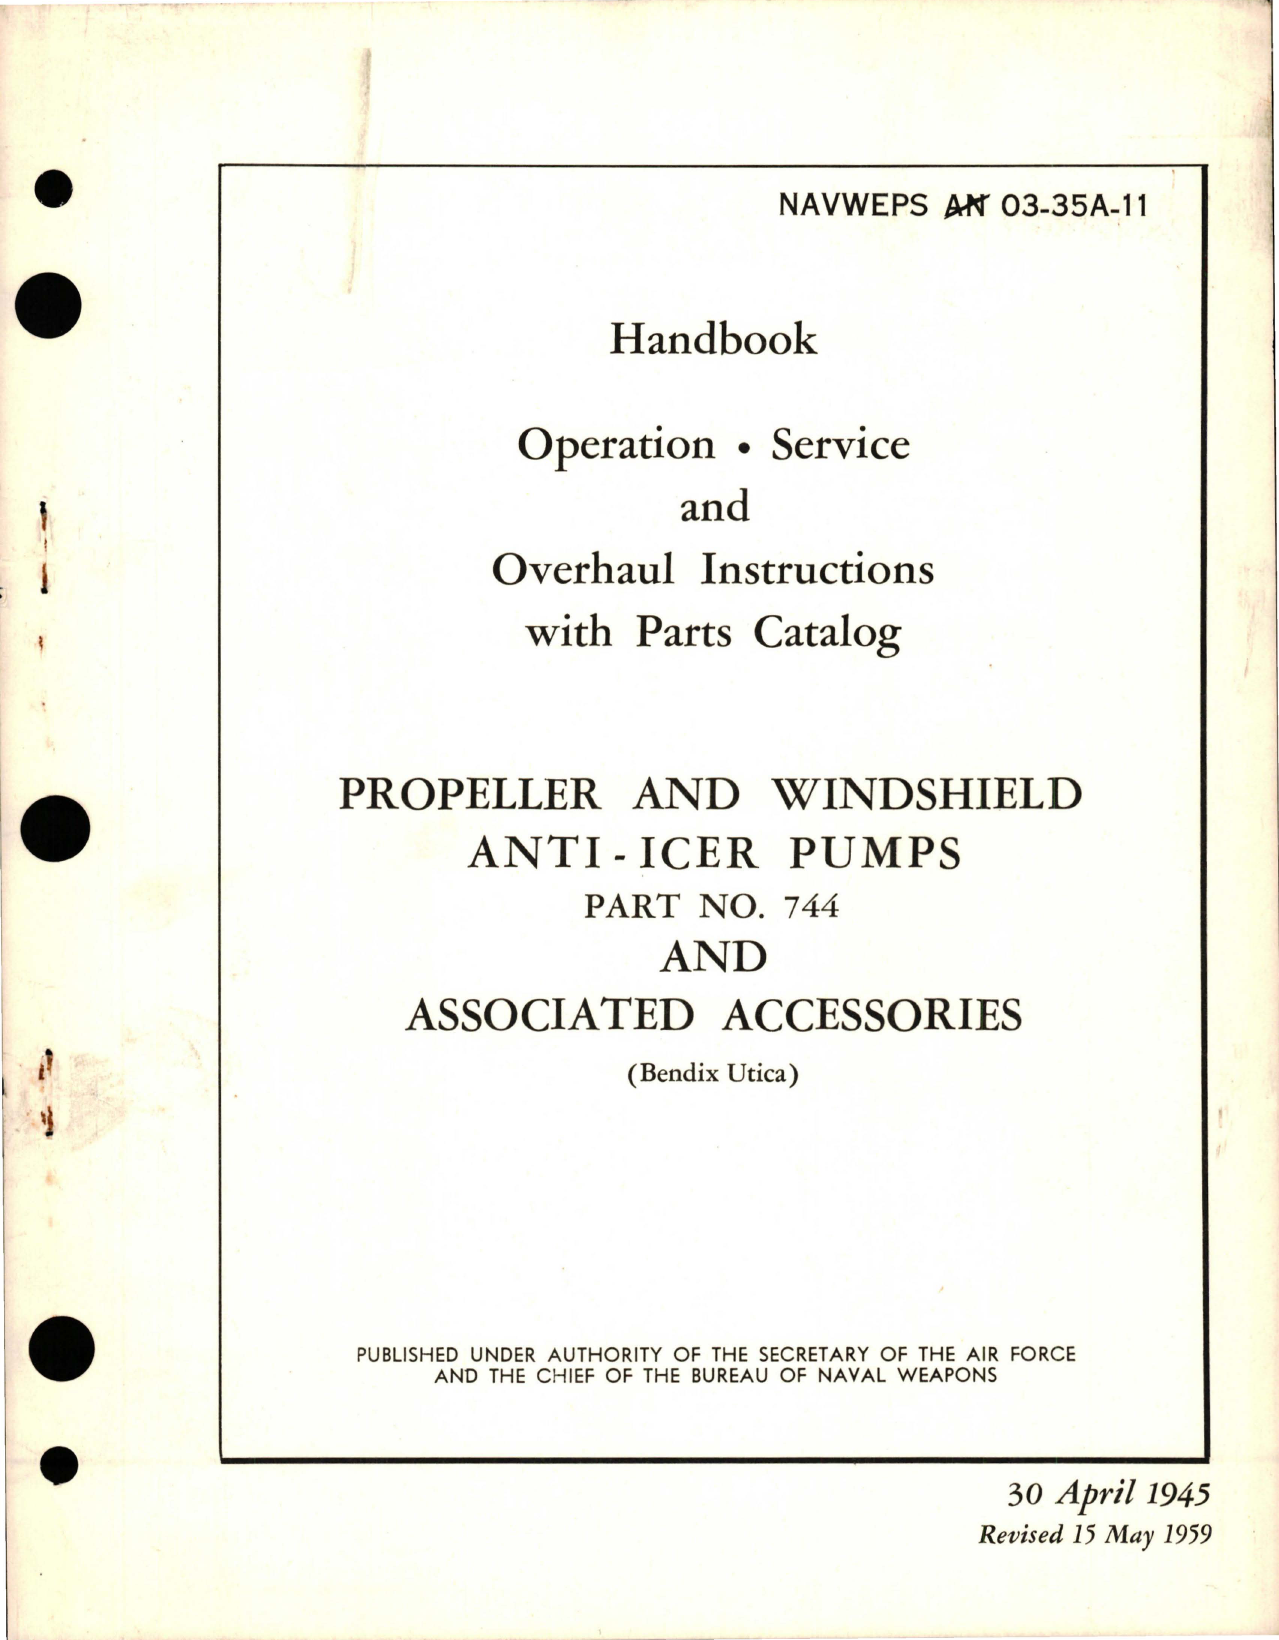 Sample page 1 from AirCorps Library document: Operation, Service and Overhaul Instructions with Parts Catalog for Propeller and Windshield Anti-Icer Pumps and Associated Accessories - Part 744 